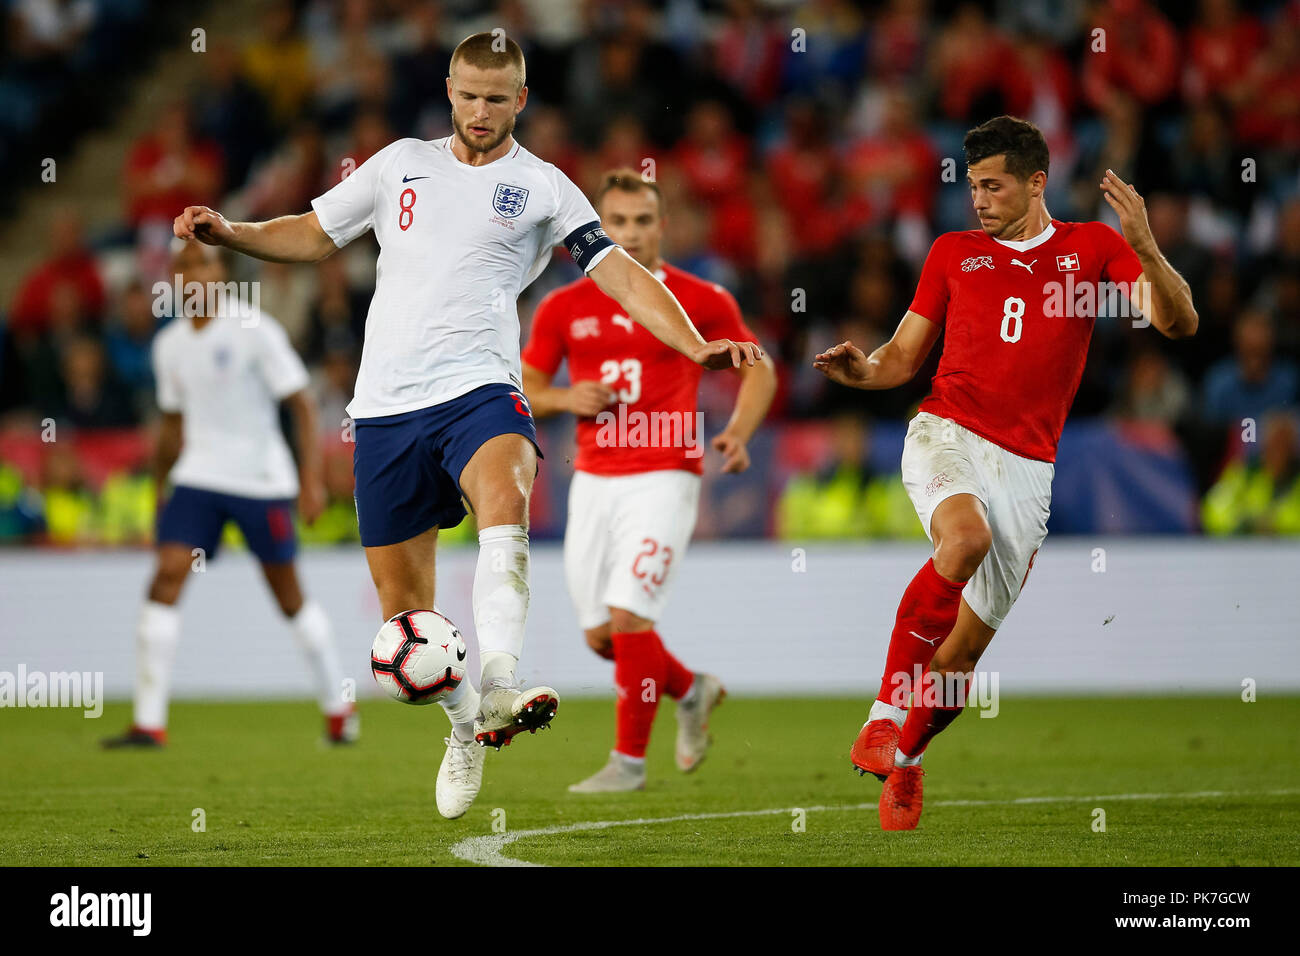 Leicester, UK. 11th September 2018. Eric Dier of England and Remo Freuler of Switzerland during the International Friendly match between England and Switzerland at King Power Stadium on September 11th 2018 in Leicester, England. Credit: PHC Images/Alamy Live News Stock Photo